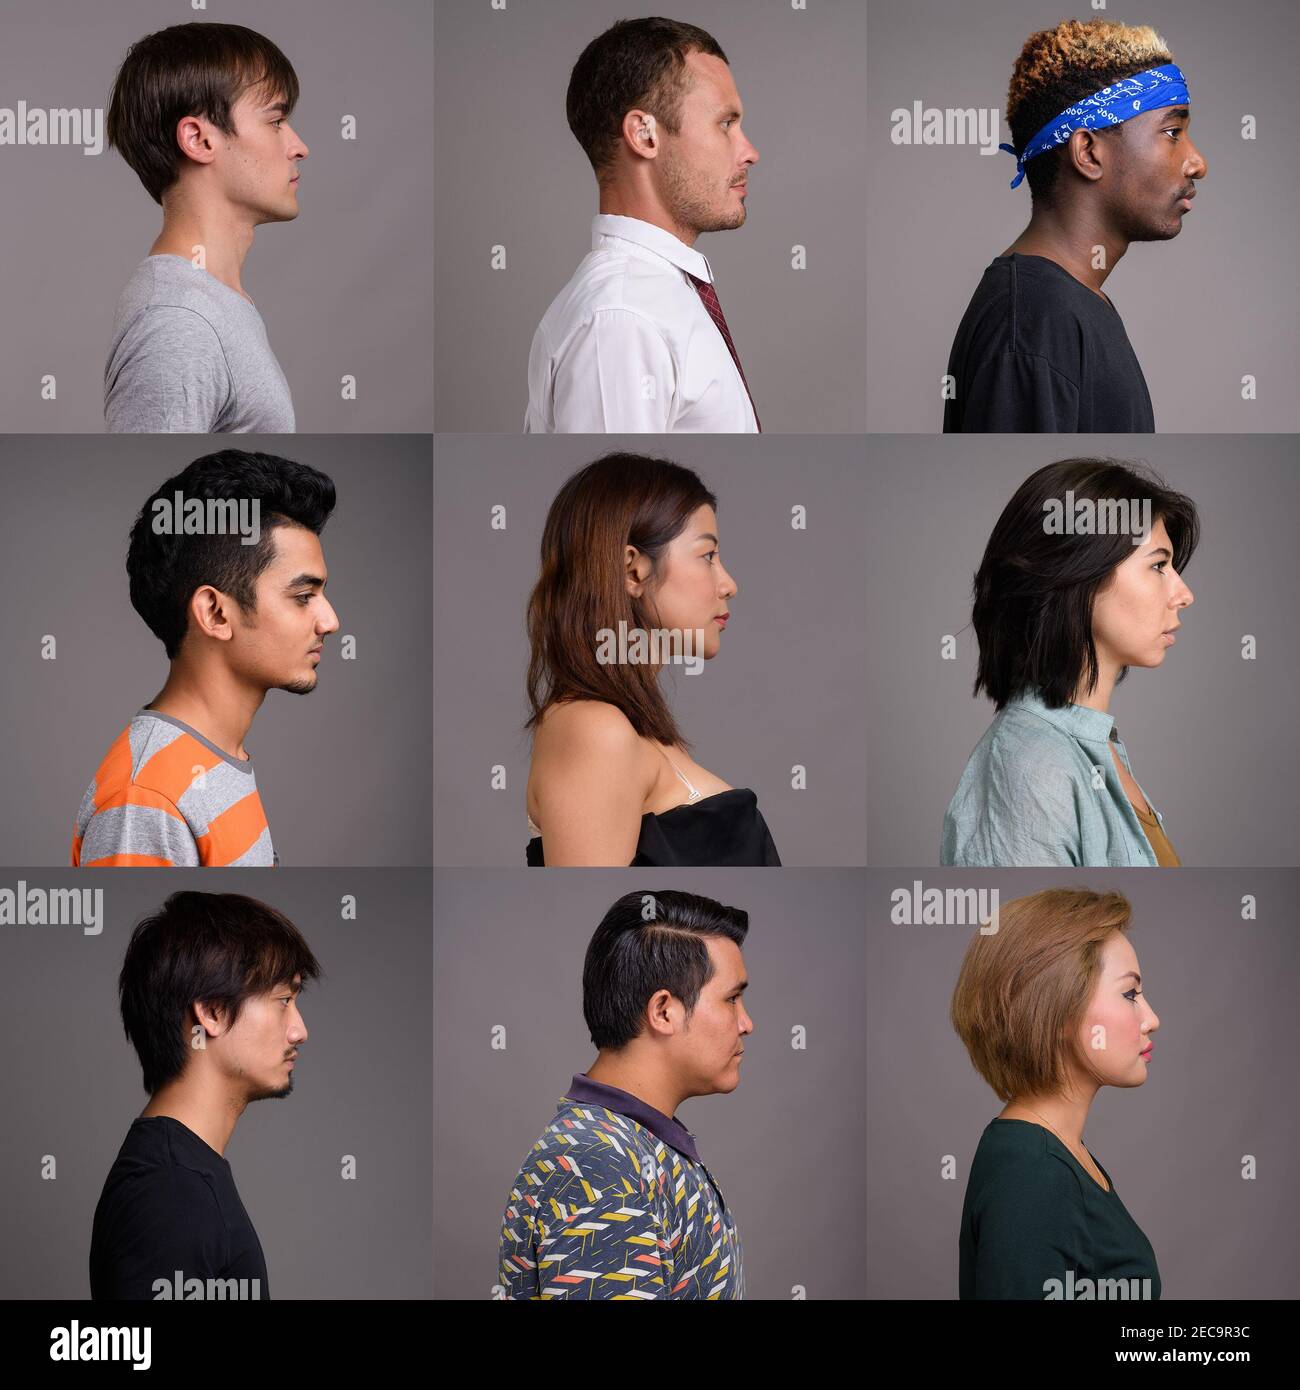 Profile view collage of people faces against studio background Stock Photo